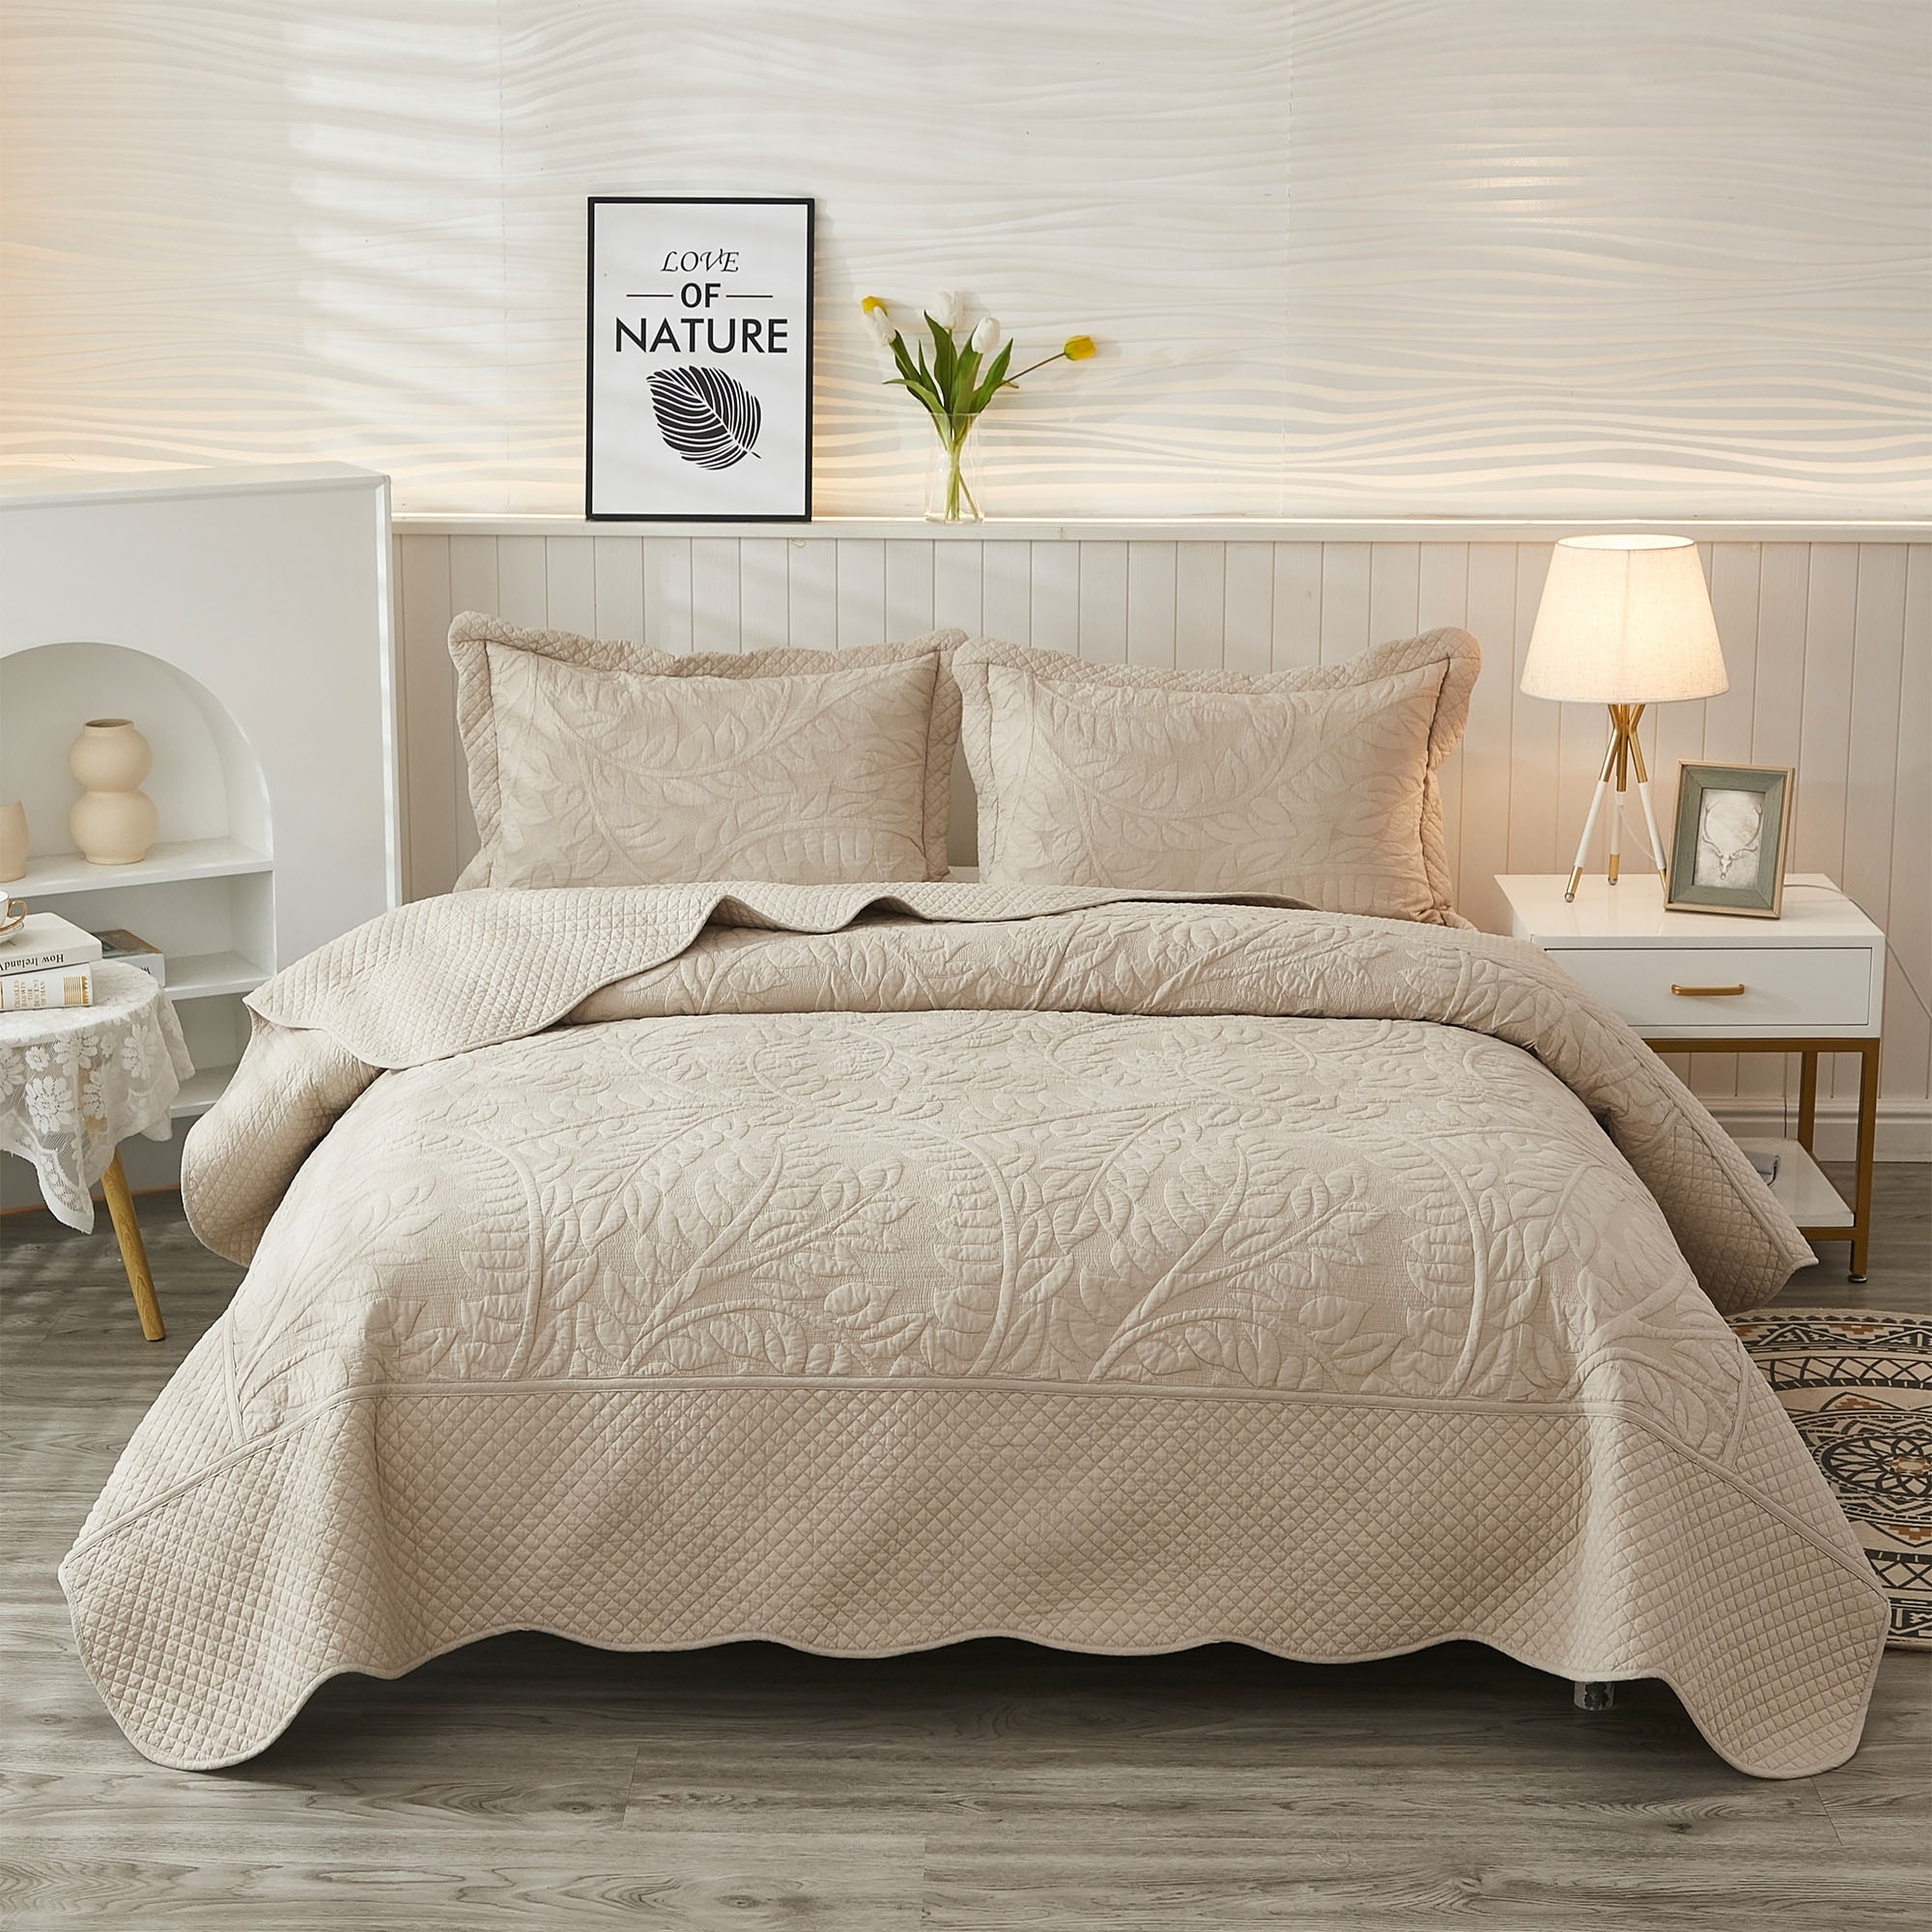 Top Rated Bedding - Bed Bath & Beyond